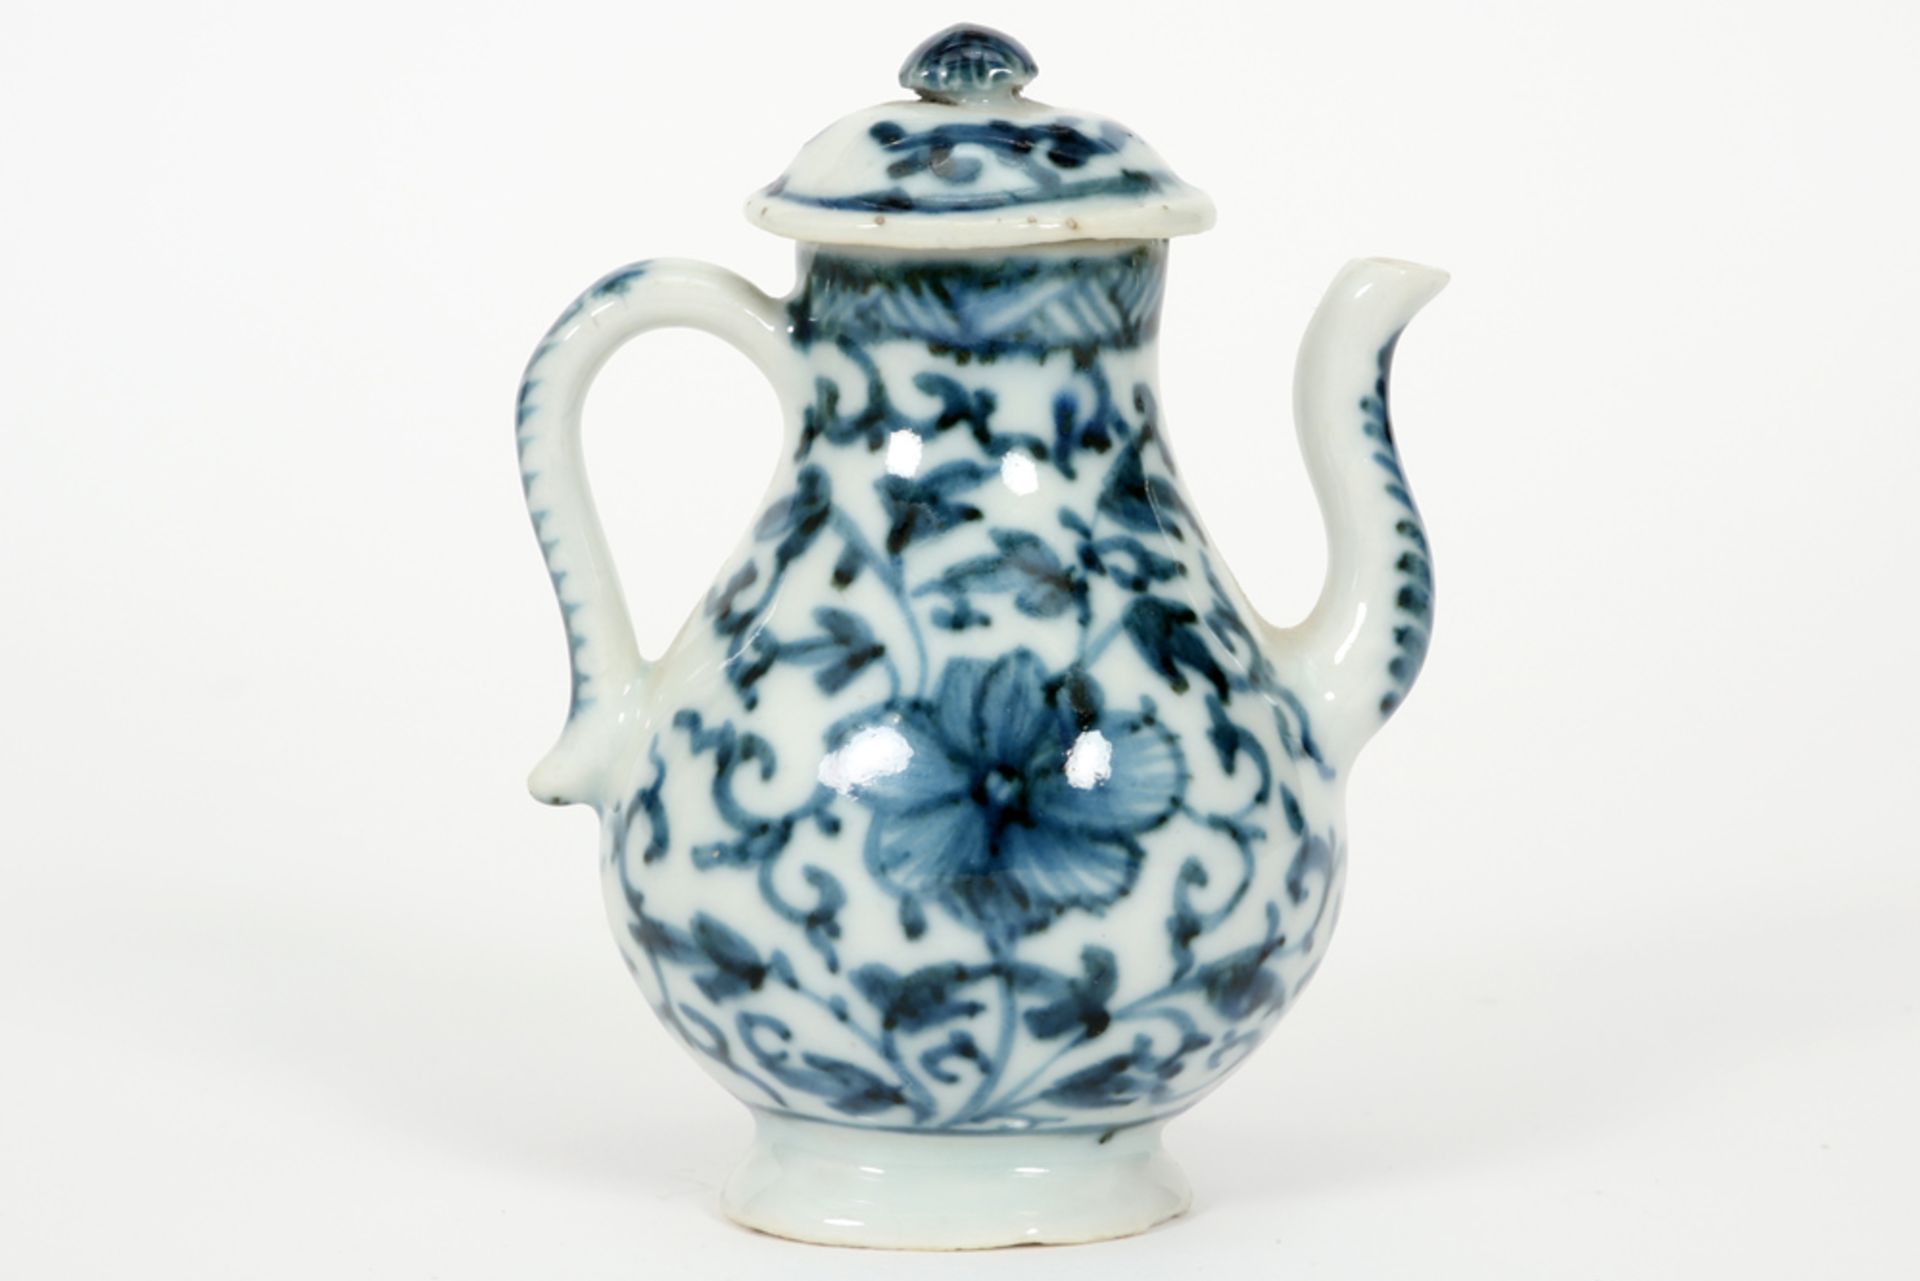 18th Cent. Chinese miniature lidded jug in porcelain with a blue-white decor || Achttiende eeuwse